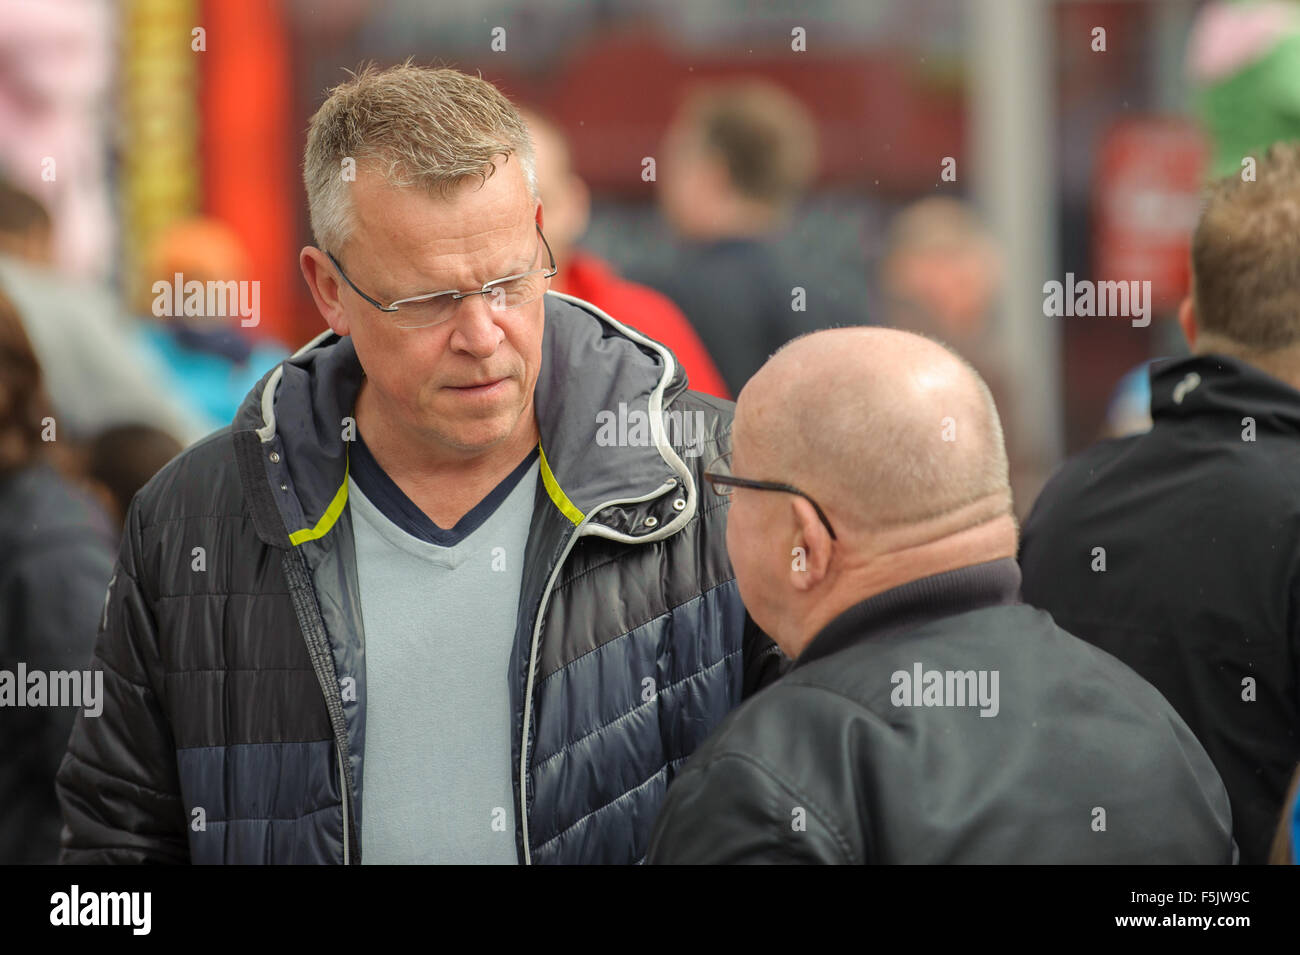 IFK Norrköping football coach Janne Andersson talks with locals in Norrköping, Sweden. Stock Photo